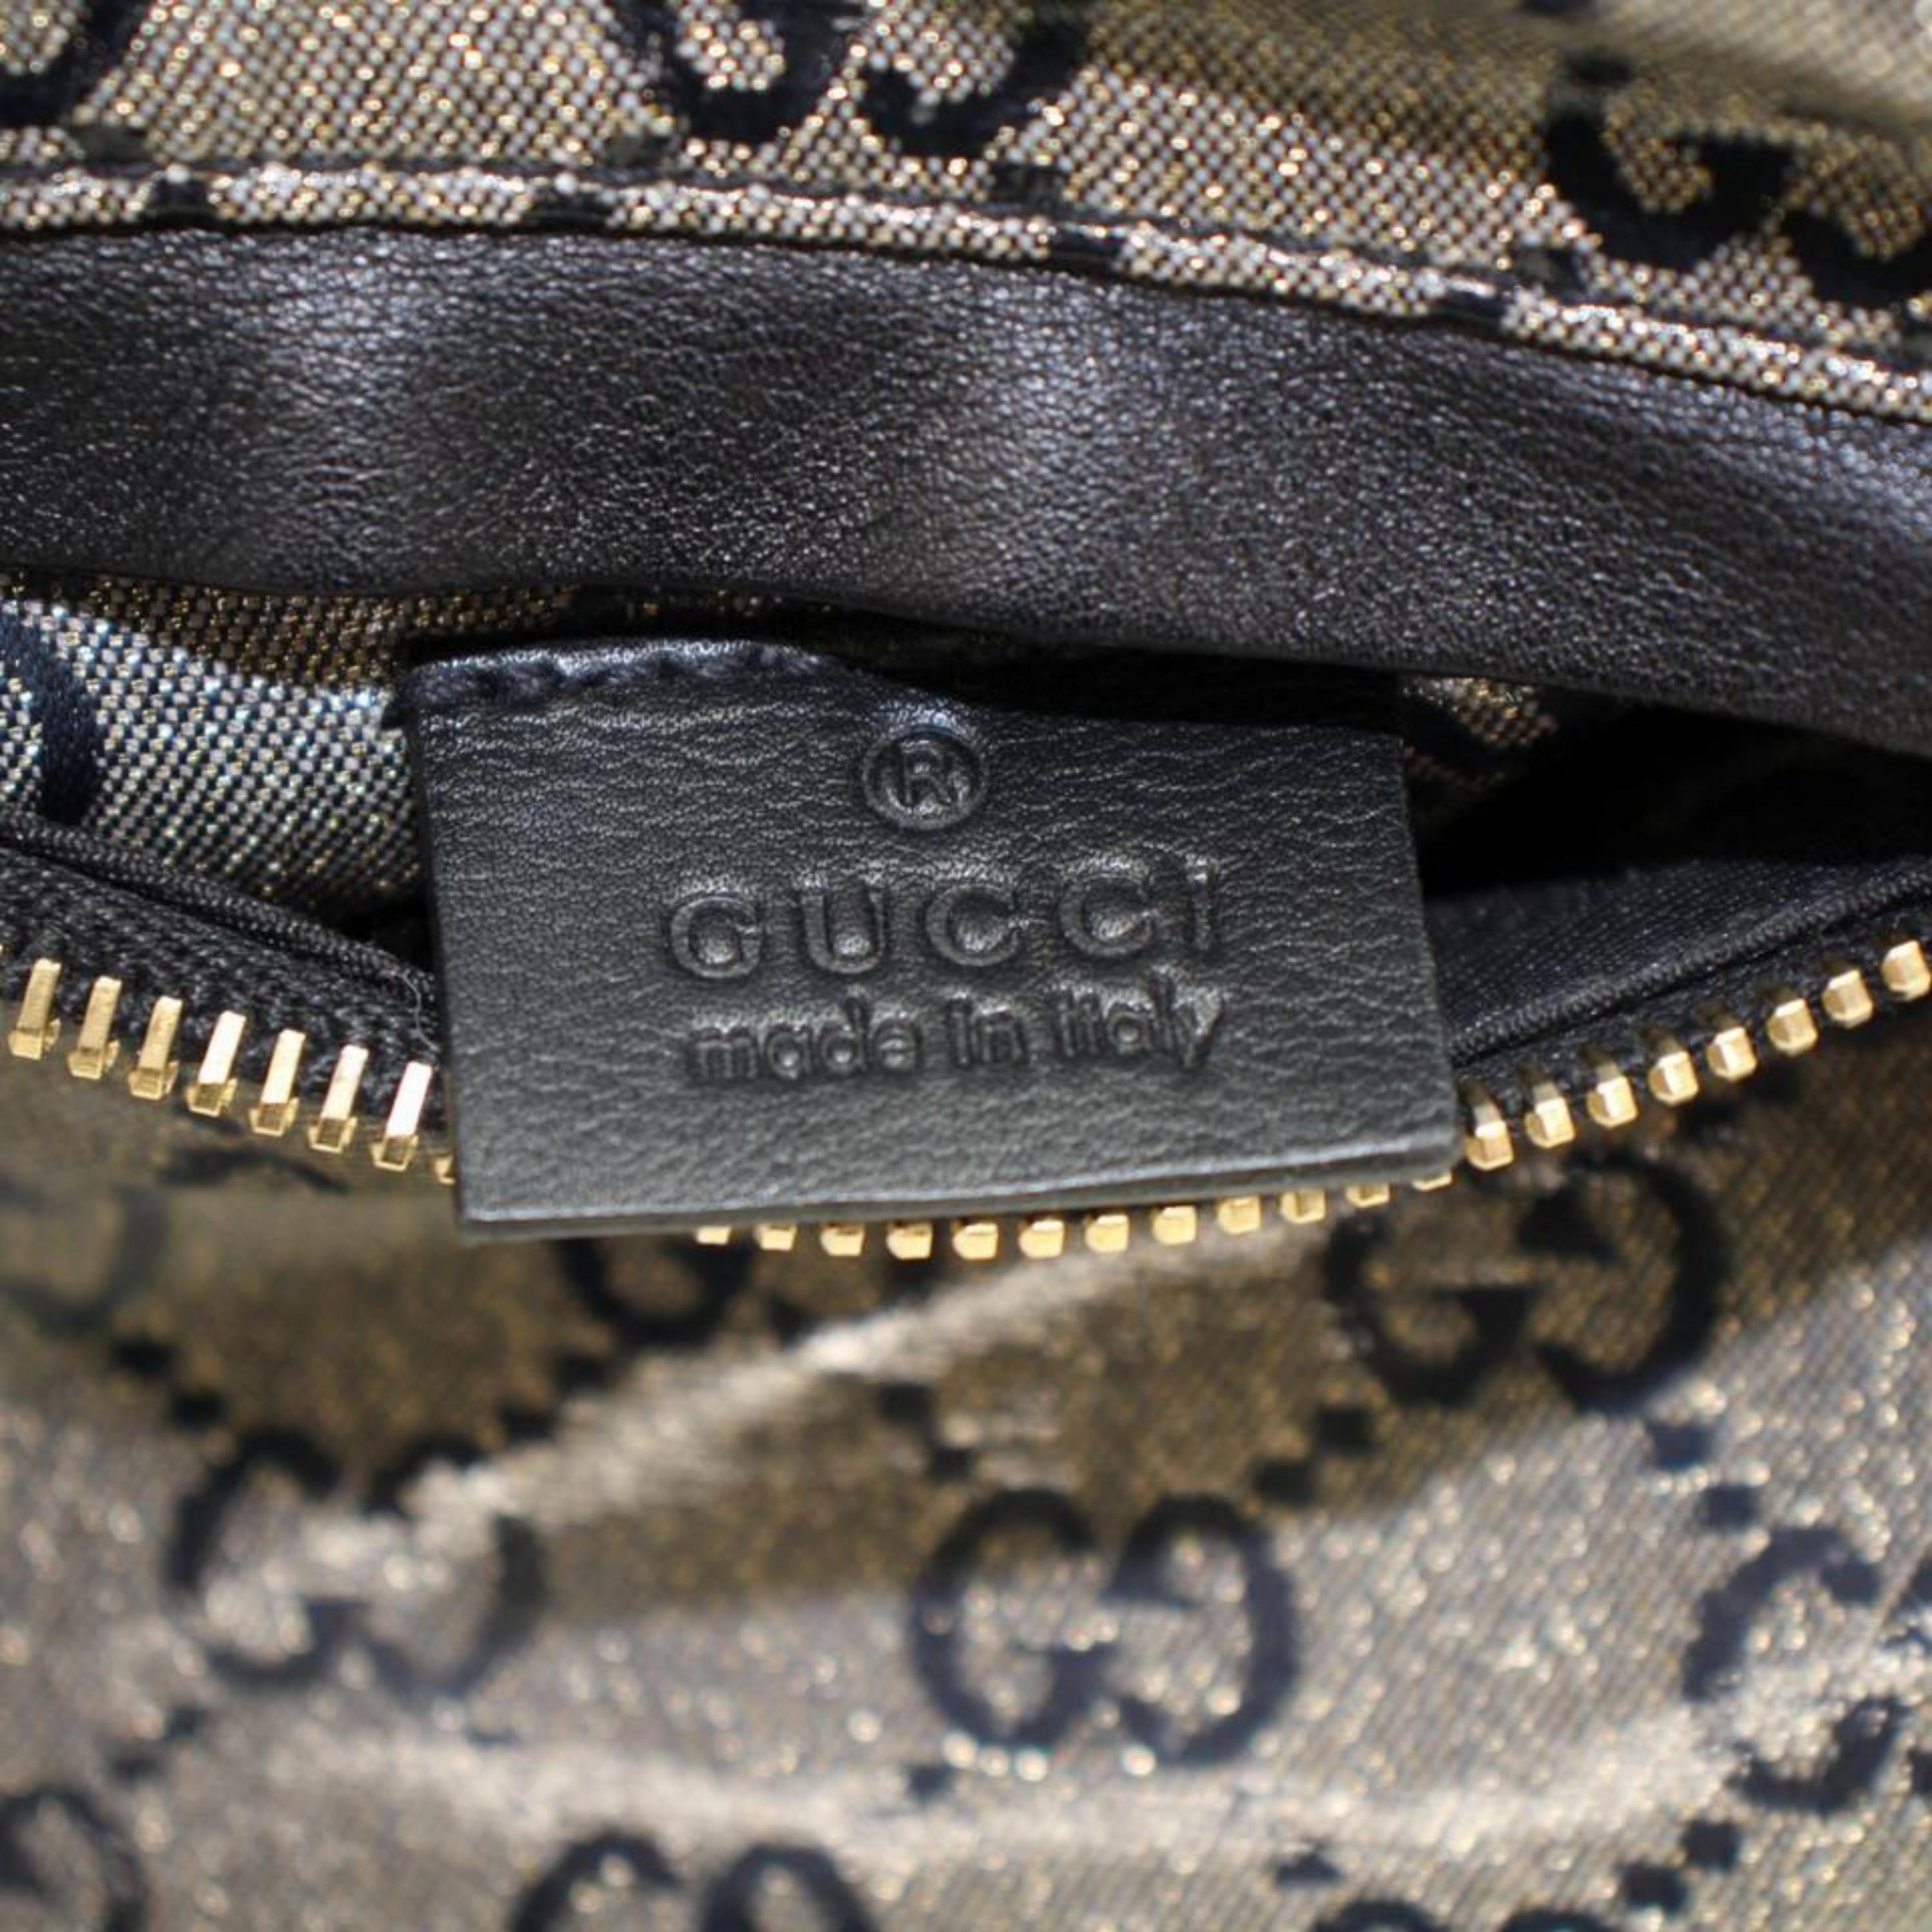 Gucci Crystal Monogram Belt Waist Pouch 867375 Grey Coated Canvas Cross Body Bag In Good Condition For Sale In Forest Hills, NY